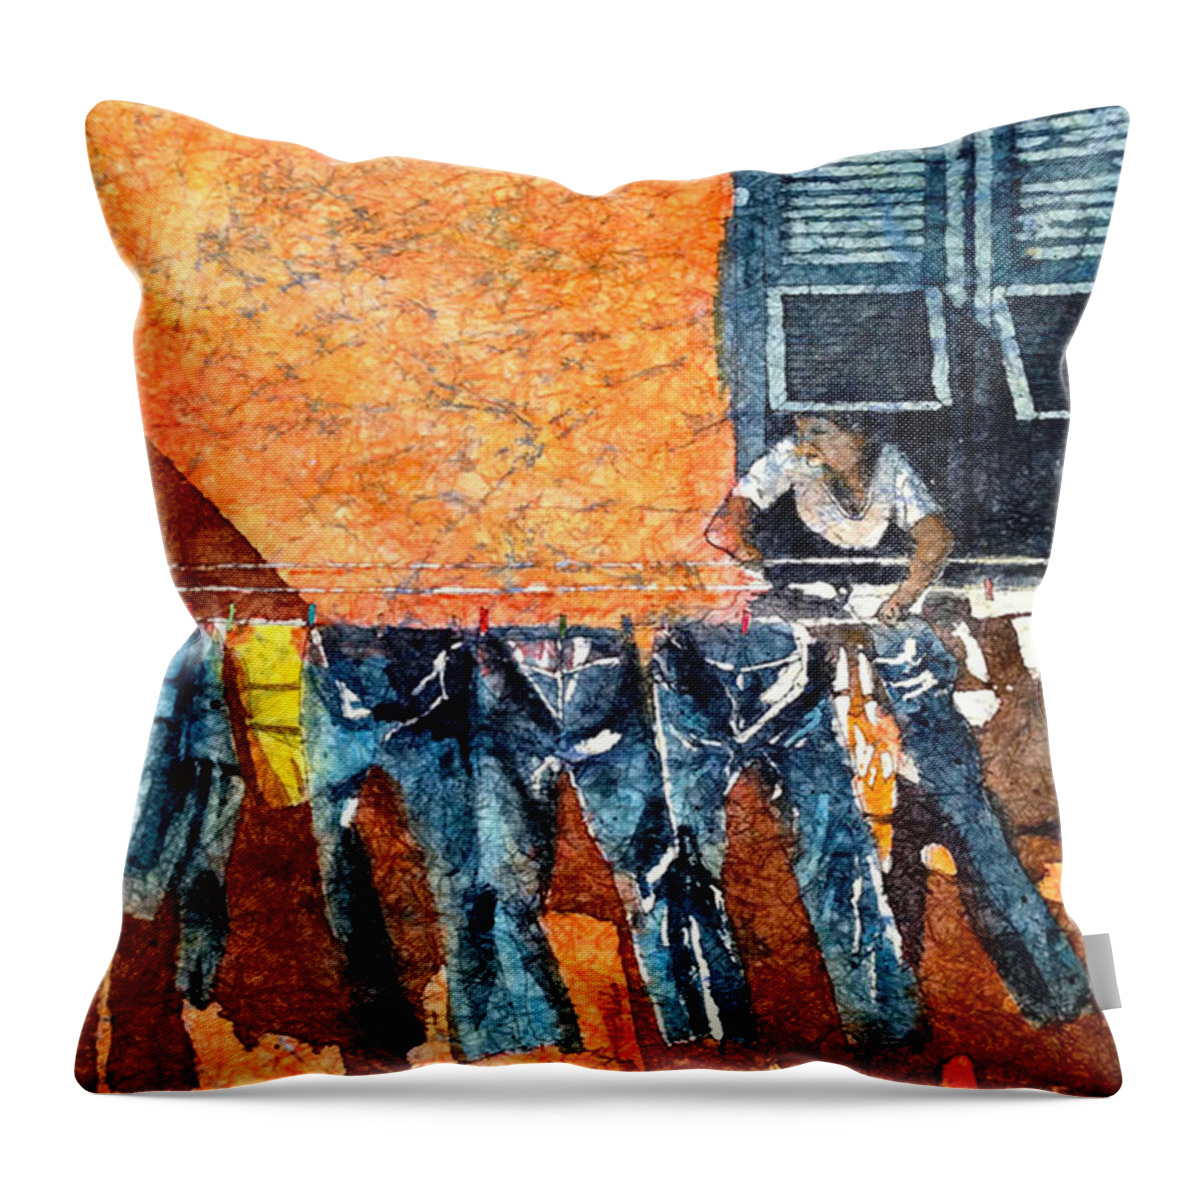 Blue Throw Pillow featuring the painting Morning In Monterosso by Diane Fujimoto